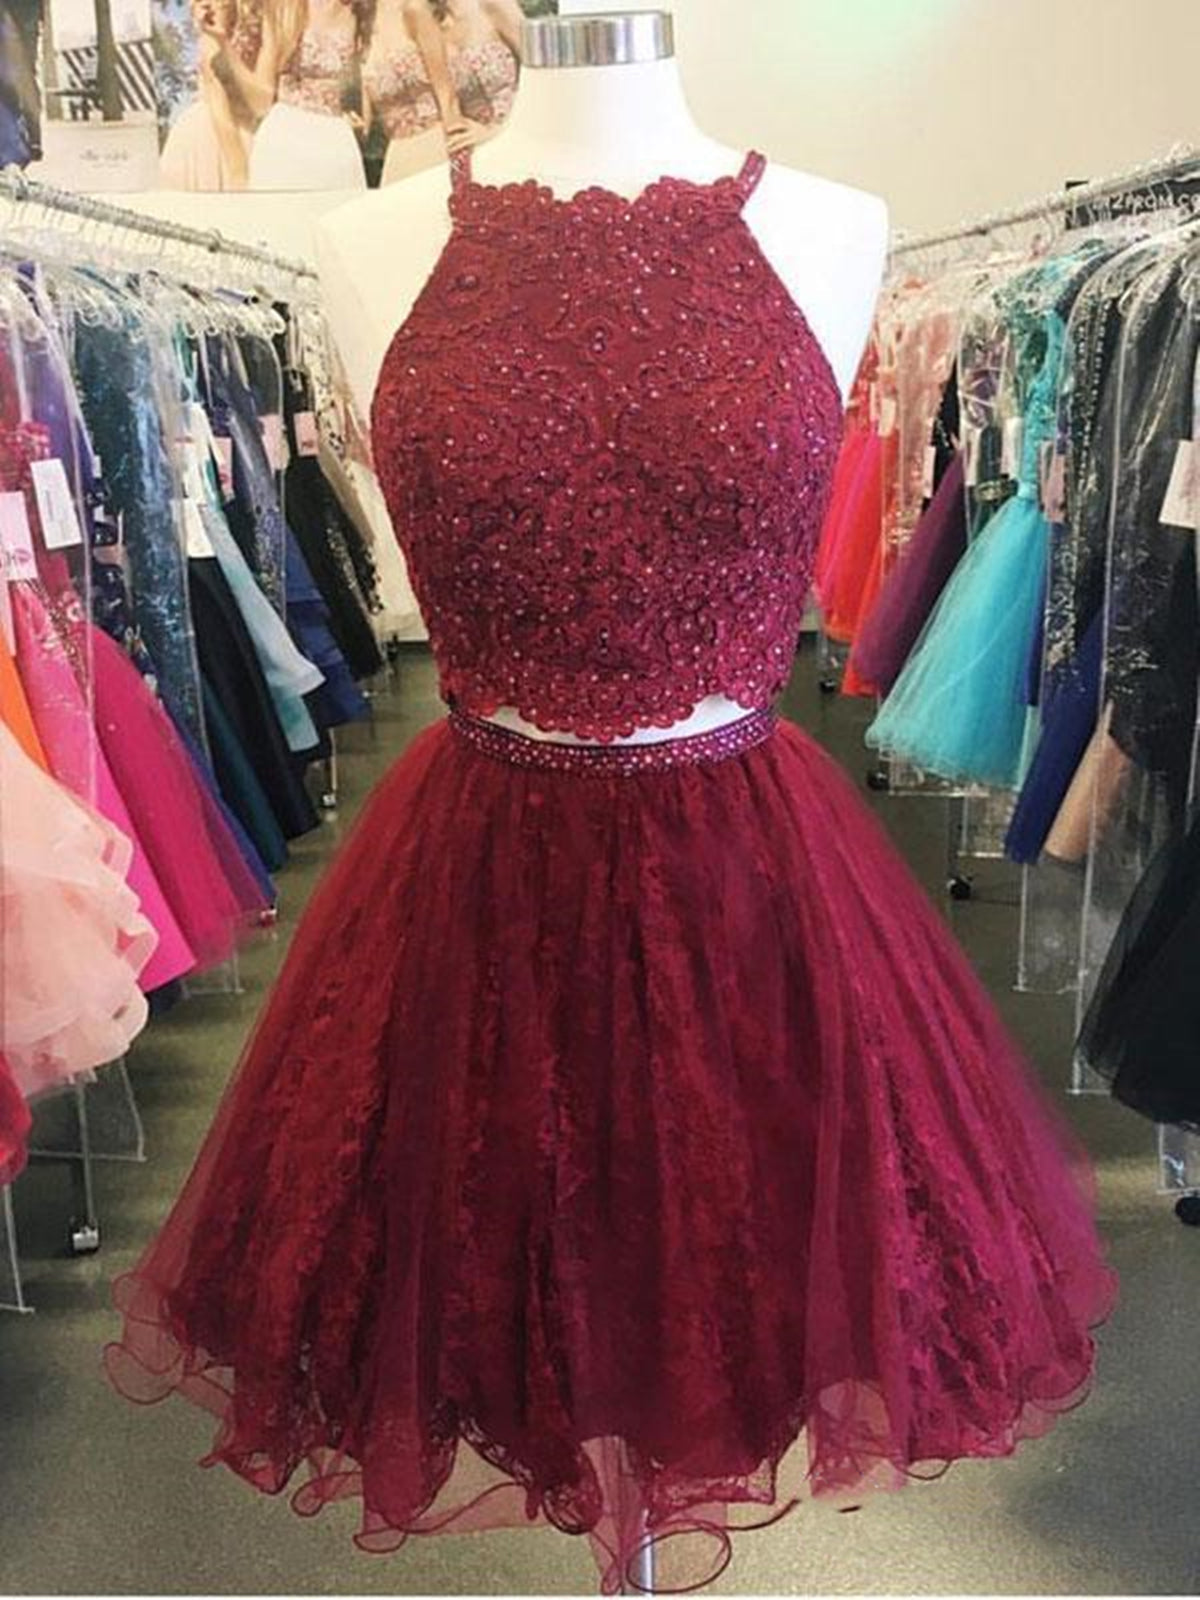 Party Dress Inspo, Two Pieces Short Burgundy Lace Prom Dresses, Wine Red 2 Pieces Short Lace Formal Homecoming Dresses